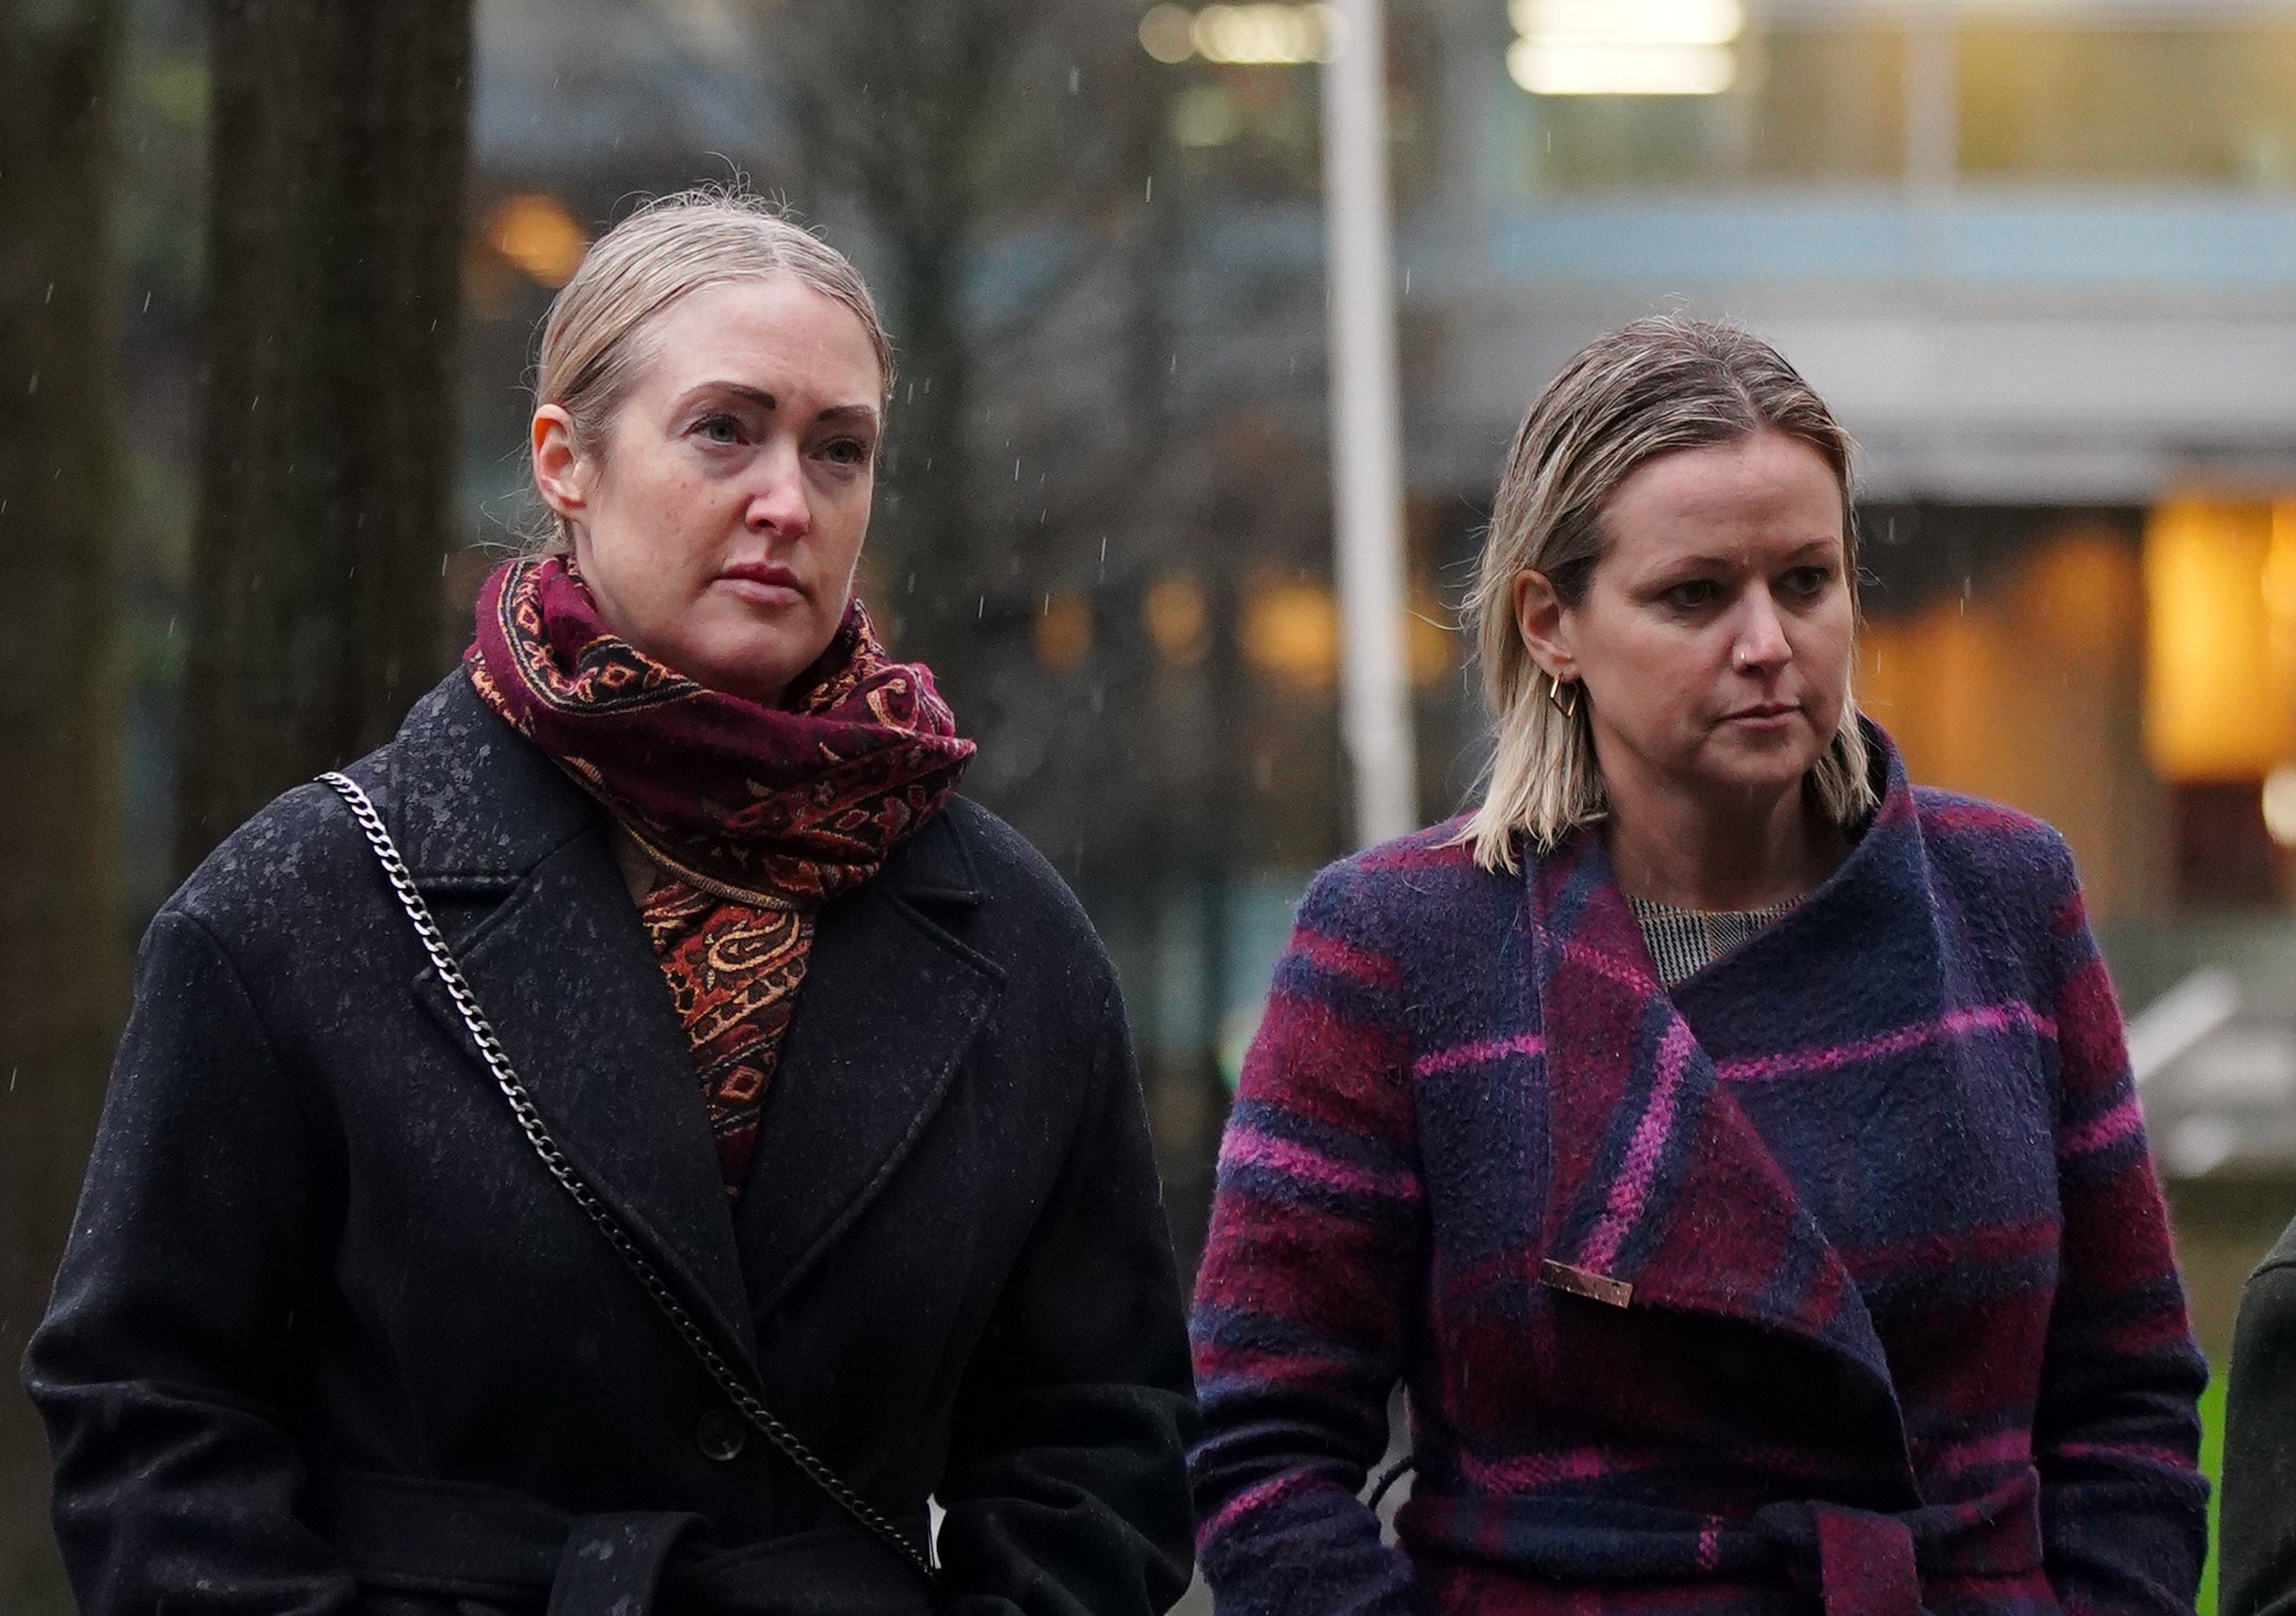 Brianna Ghey's mother Esther Ghey (left) and sister Alisha Ghey arriving at Manchester Crown Court on Monday